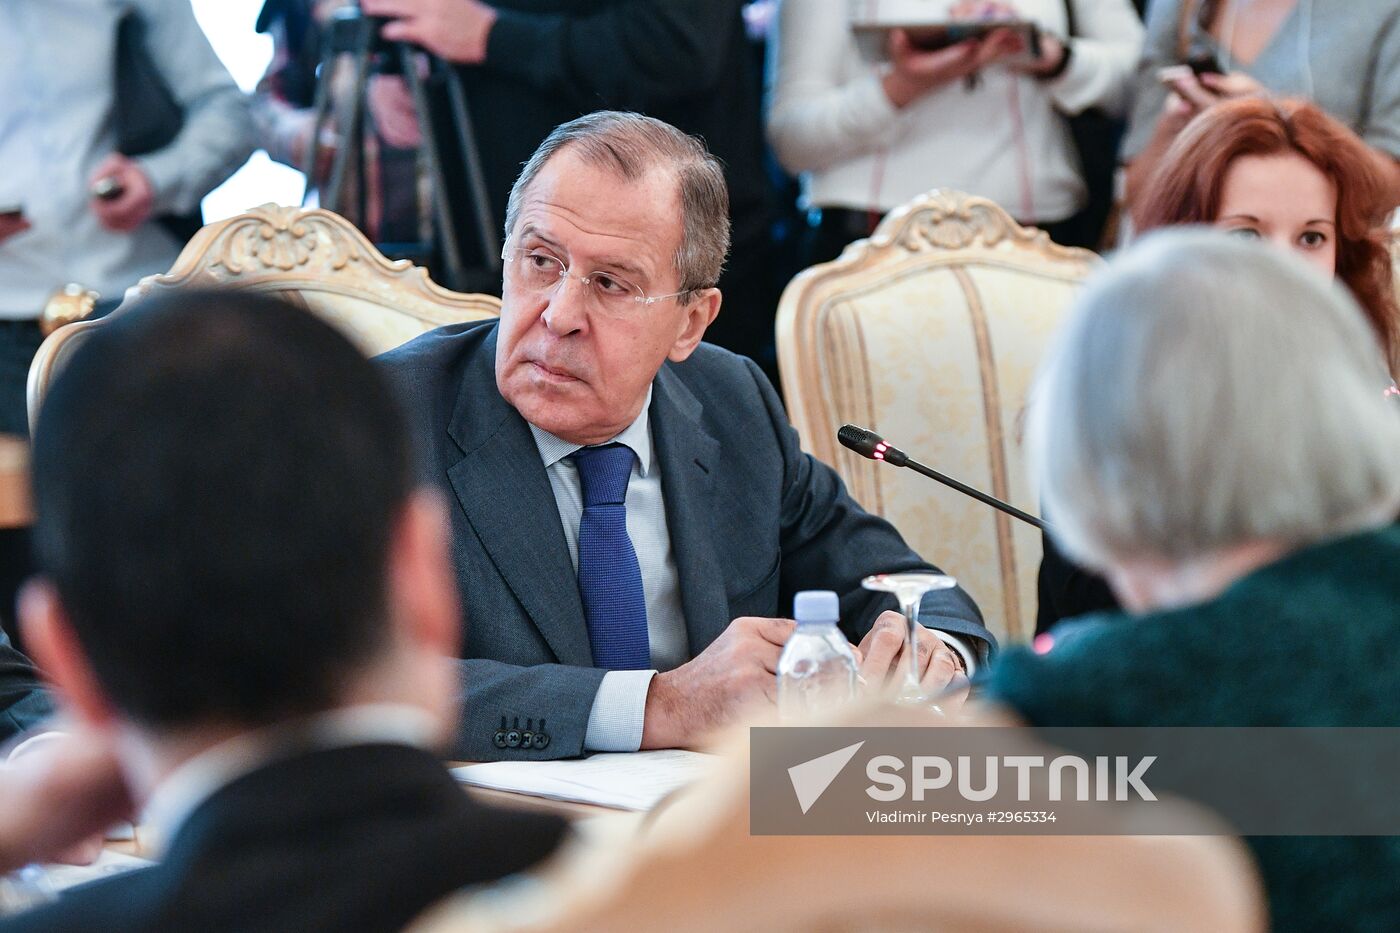 Russian Foreign Minister Sergei Lavrov meets with his Cypriot counterpart Ioannis Kasoulides